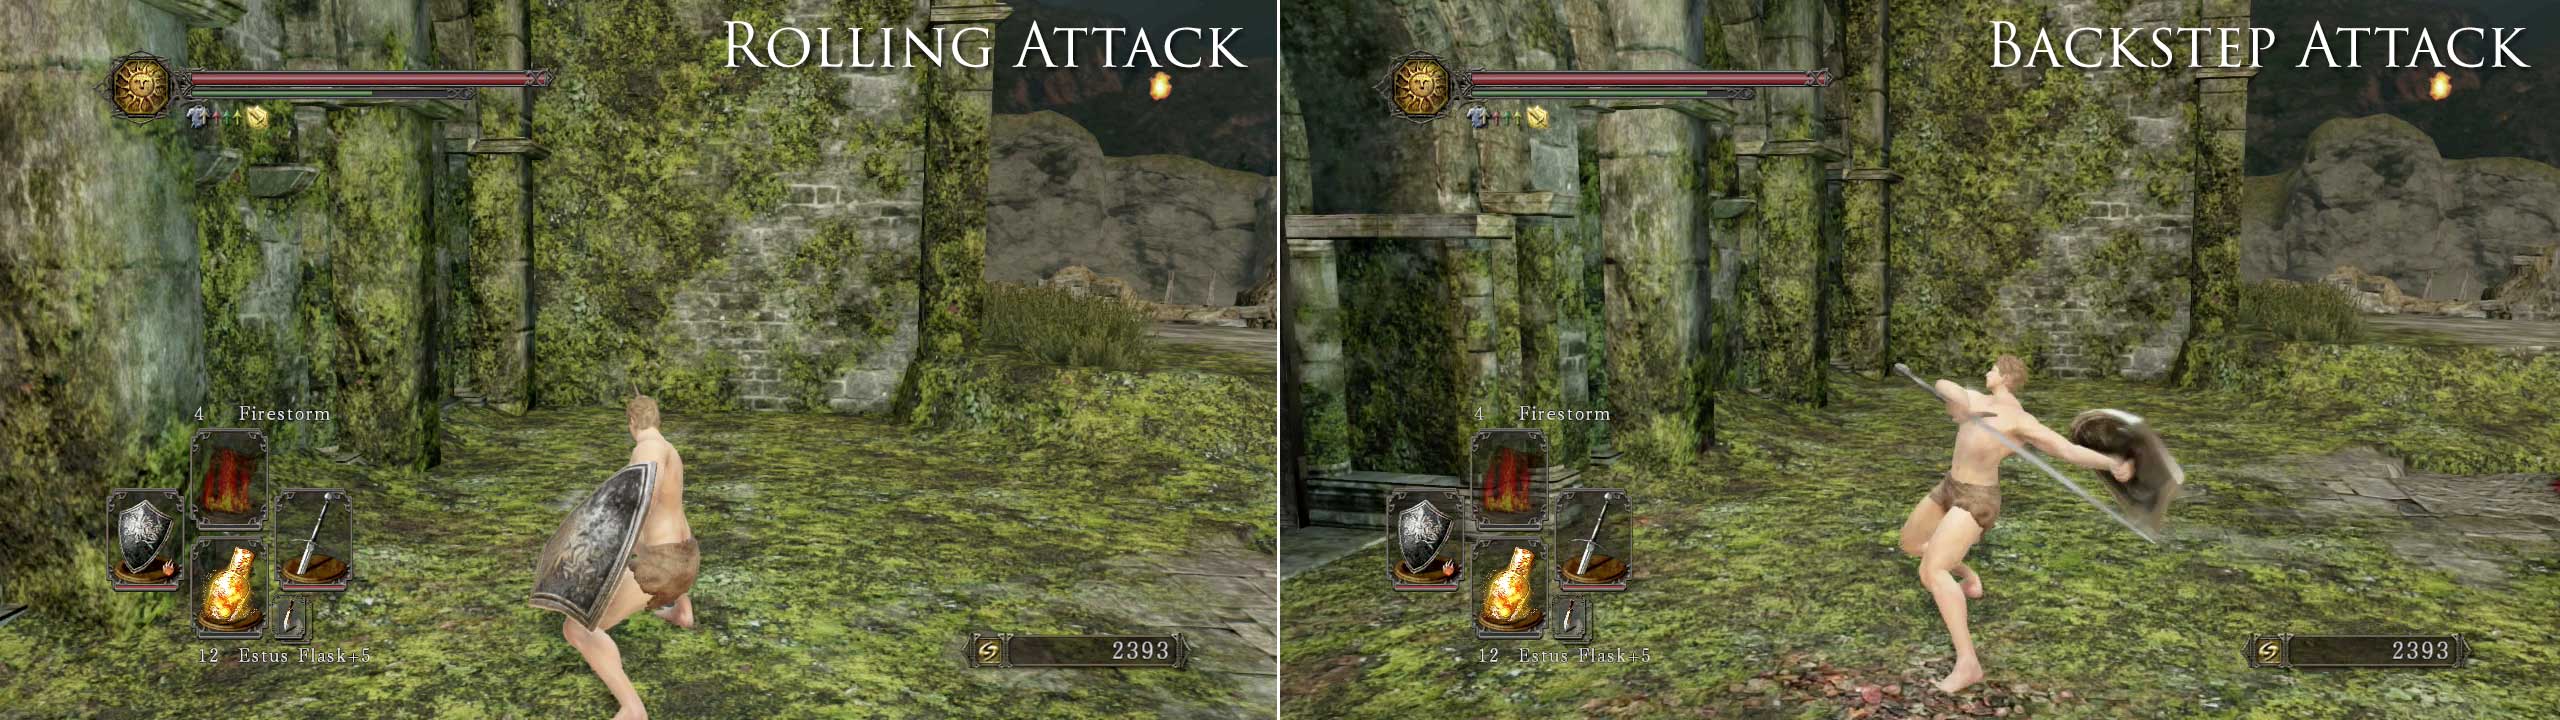 Here’s what the Rolling attack and Backstep Attacks look like with a Great Sword.